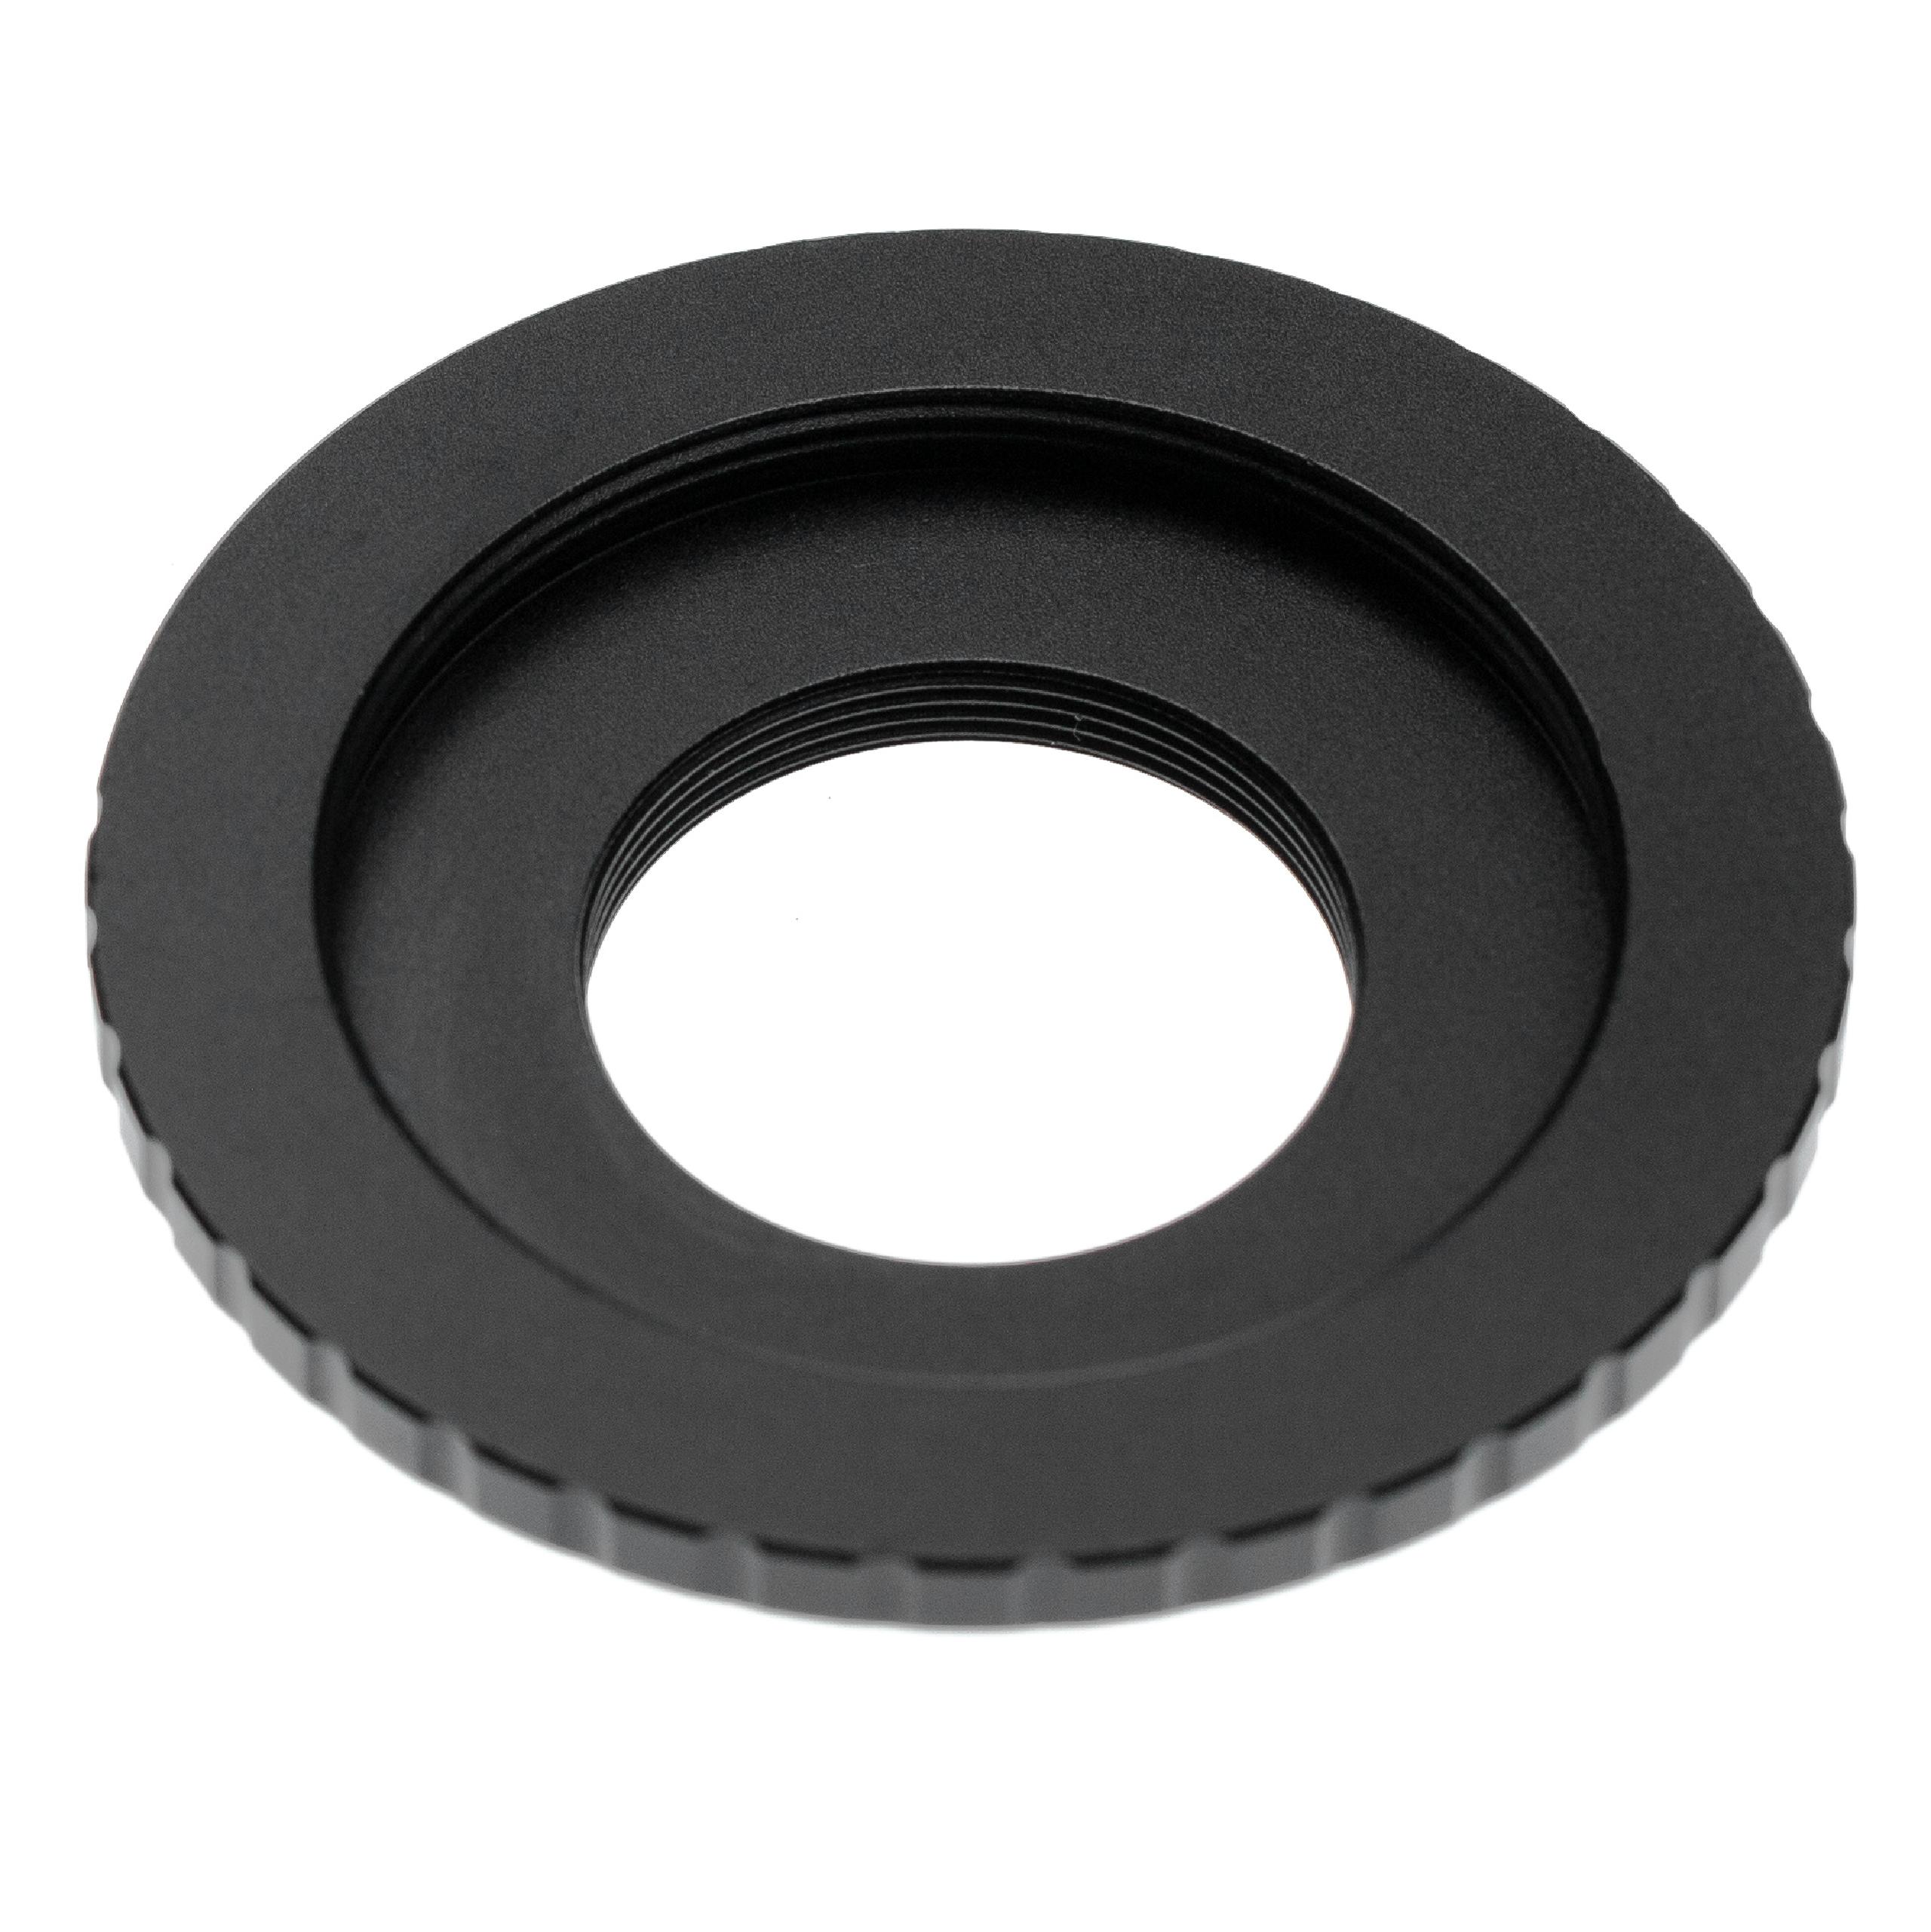 vhbw Adapter Ring for Lenses with M42 Thread Camera, Lens Black